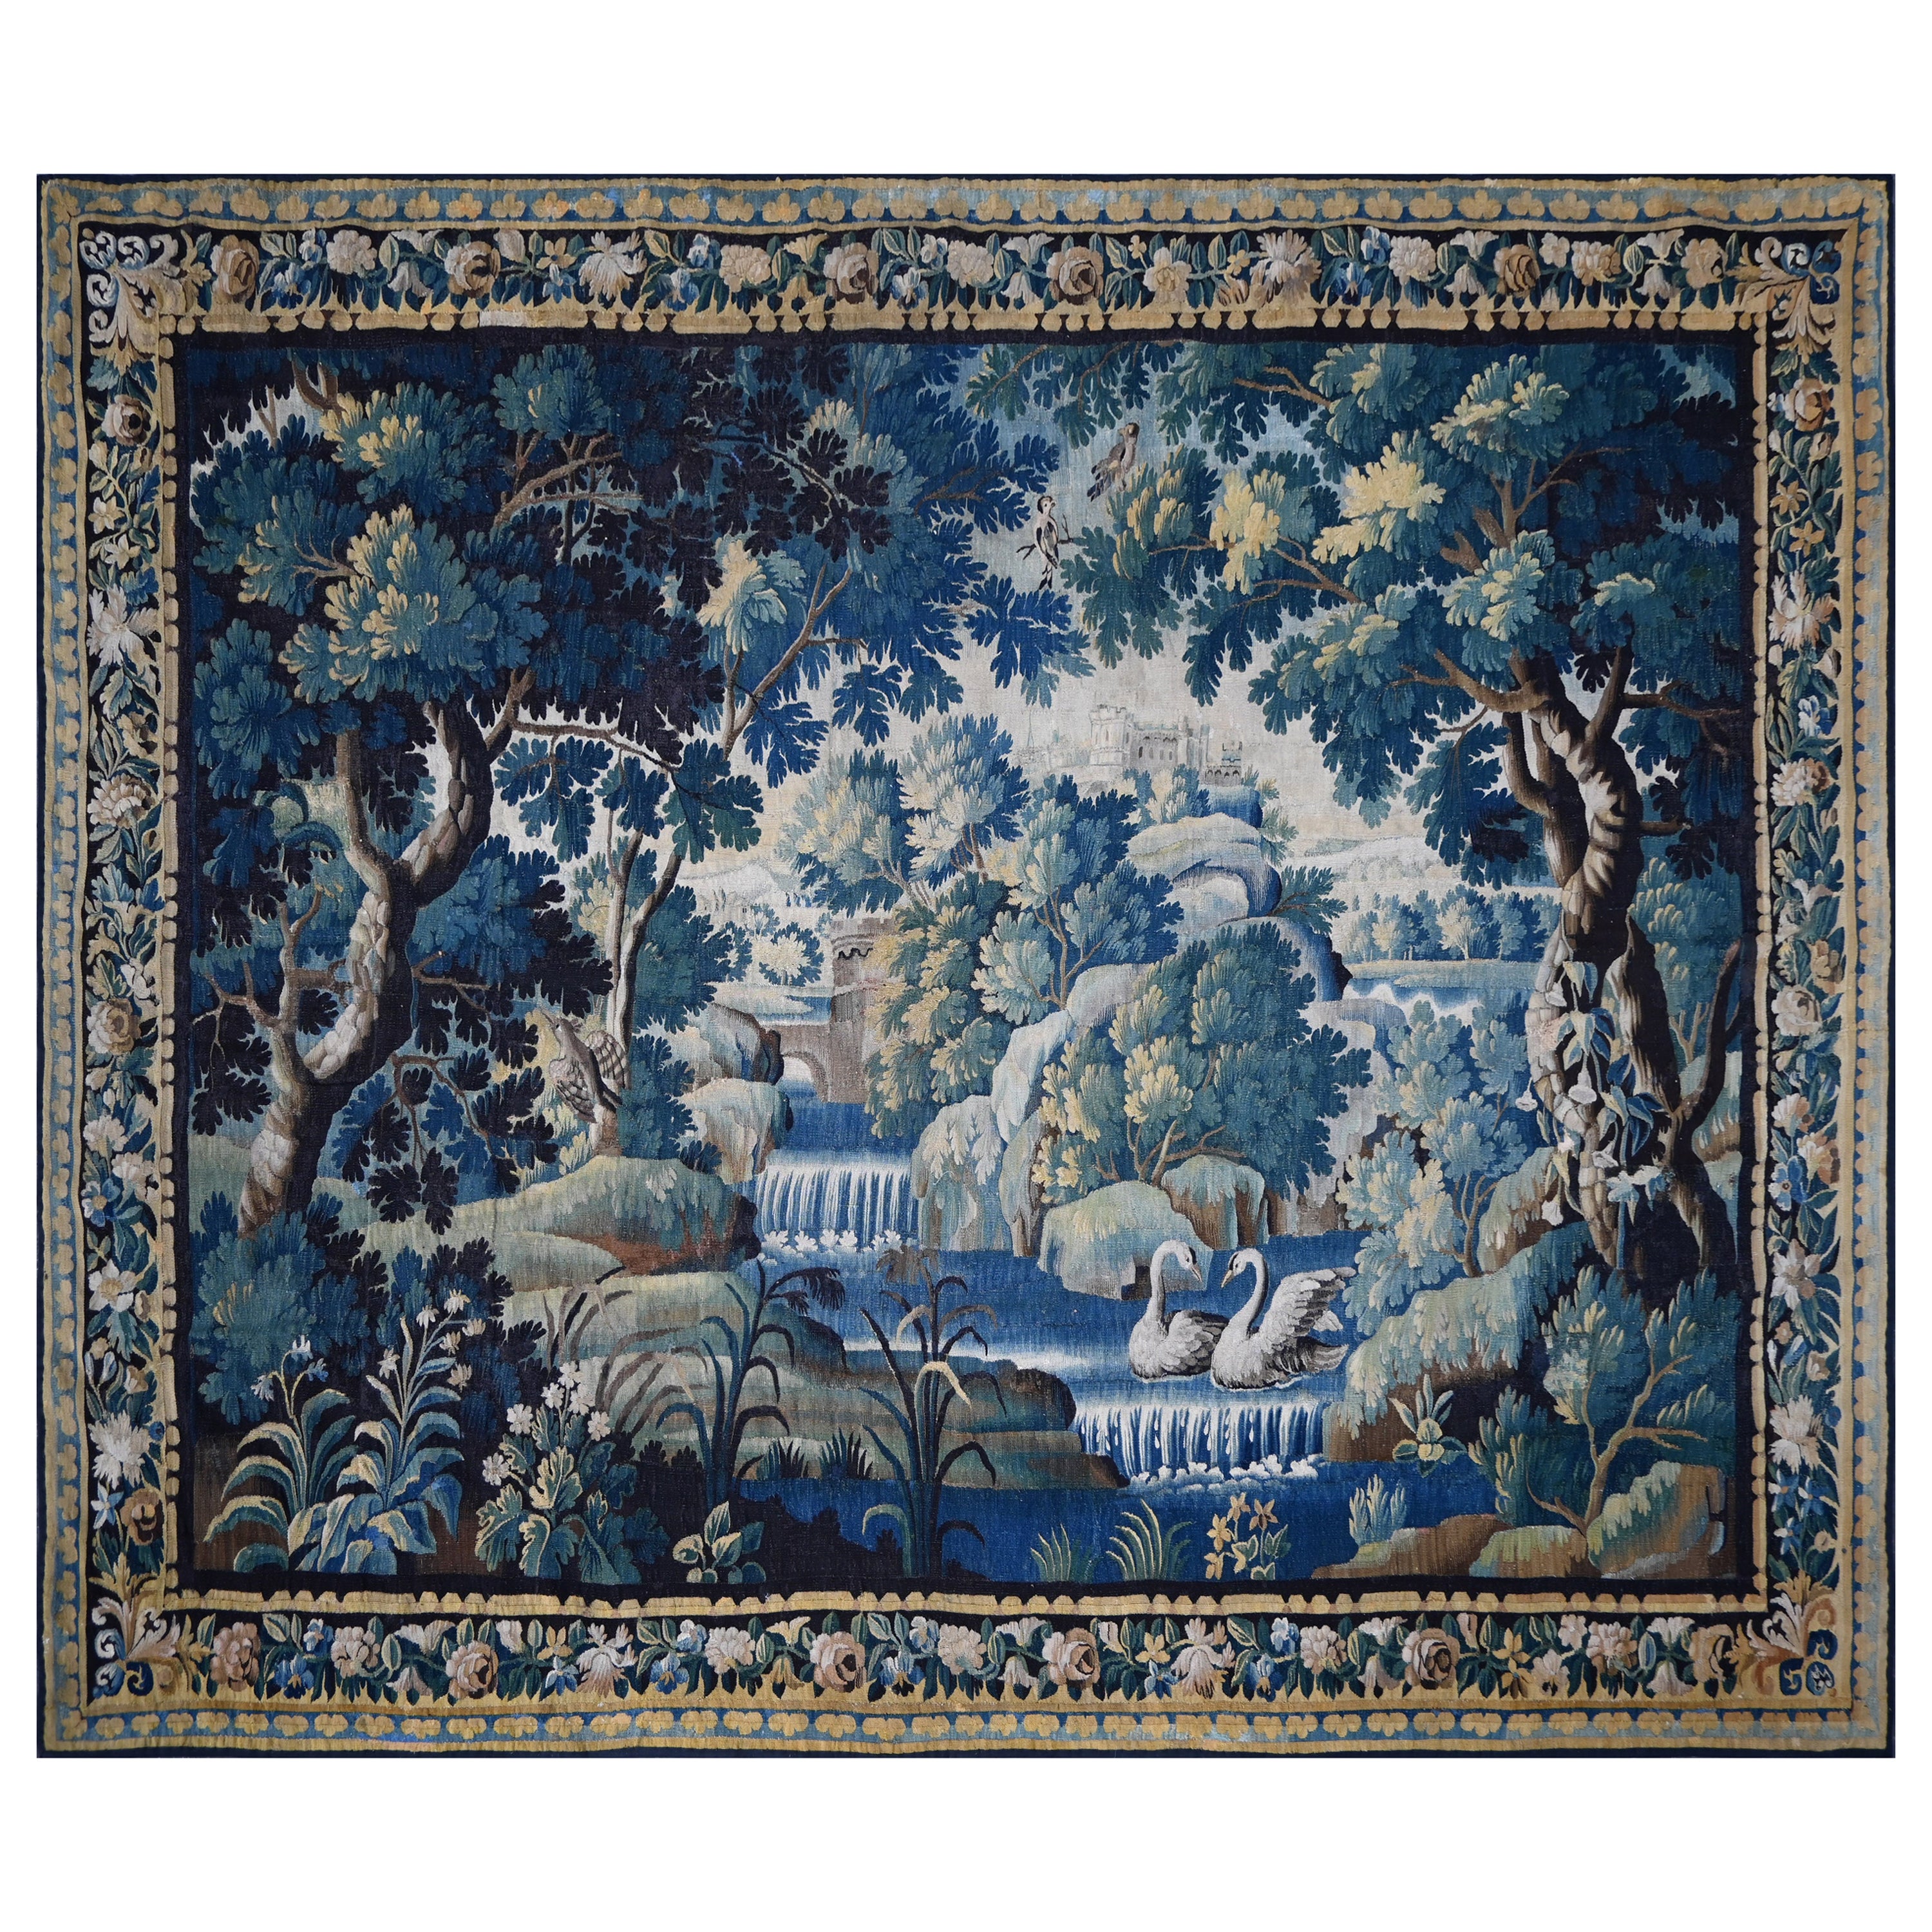 18th century Aubusson tapestry (greenery) - N°-1345